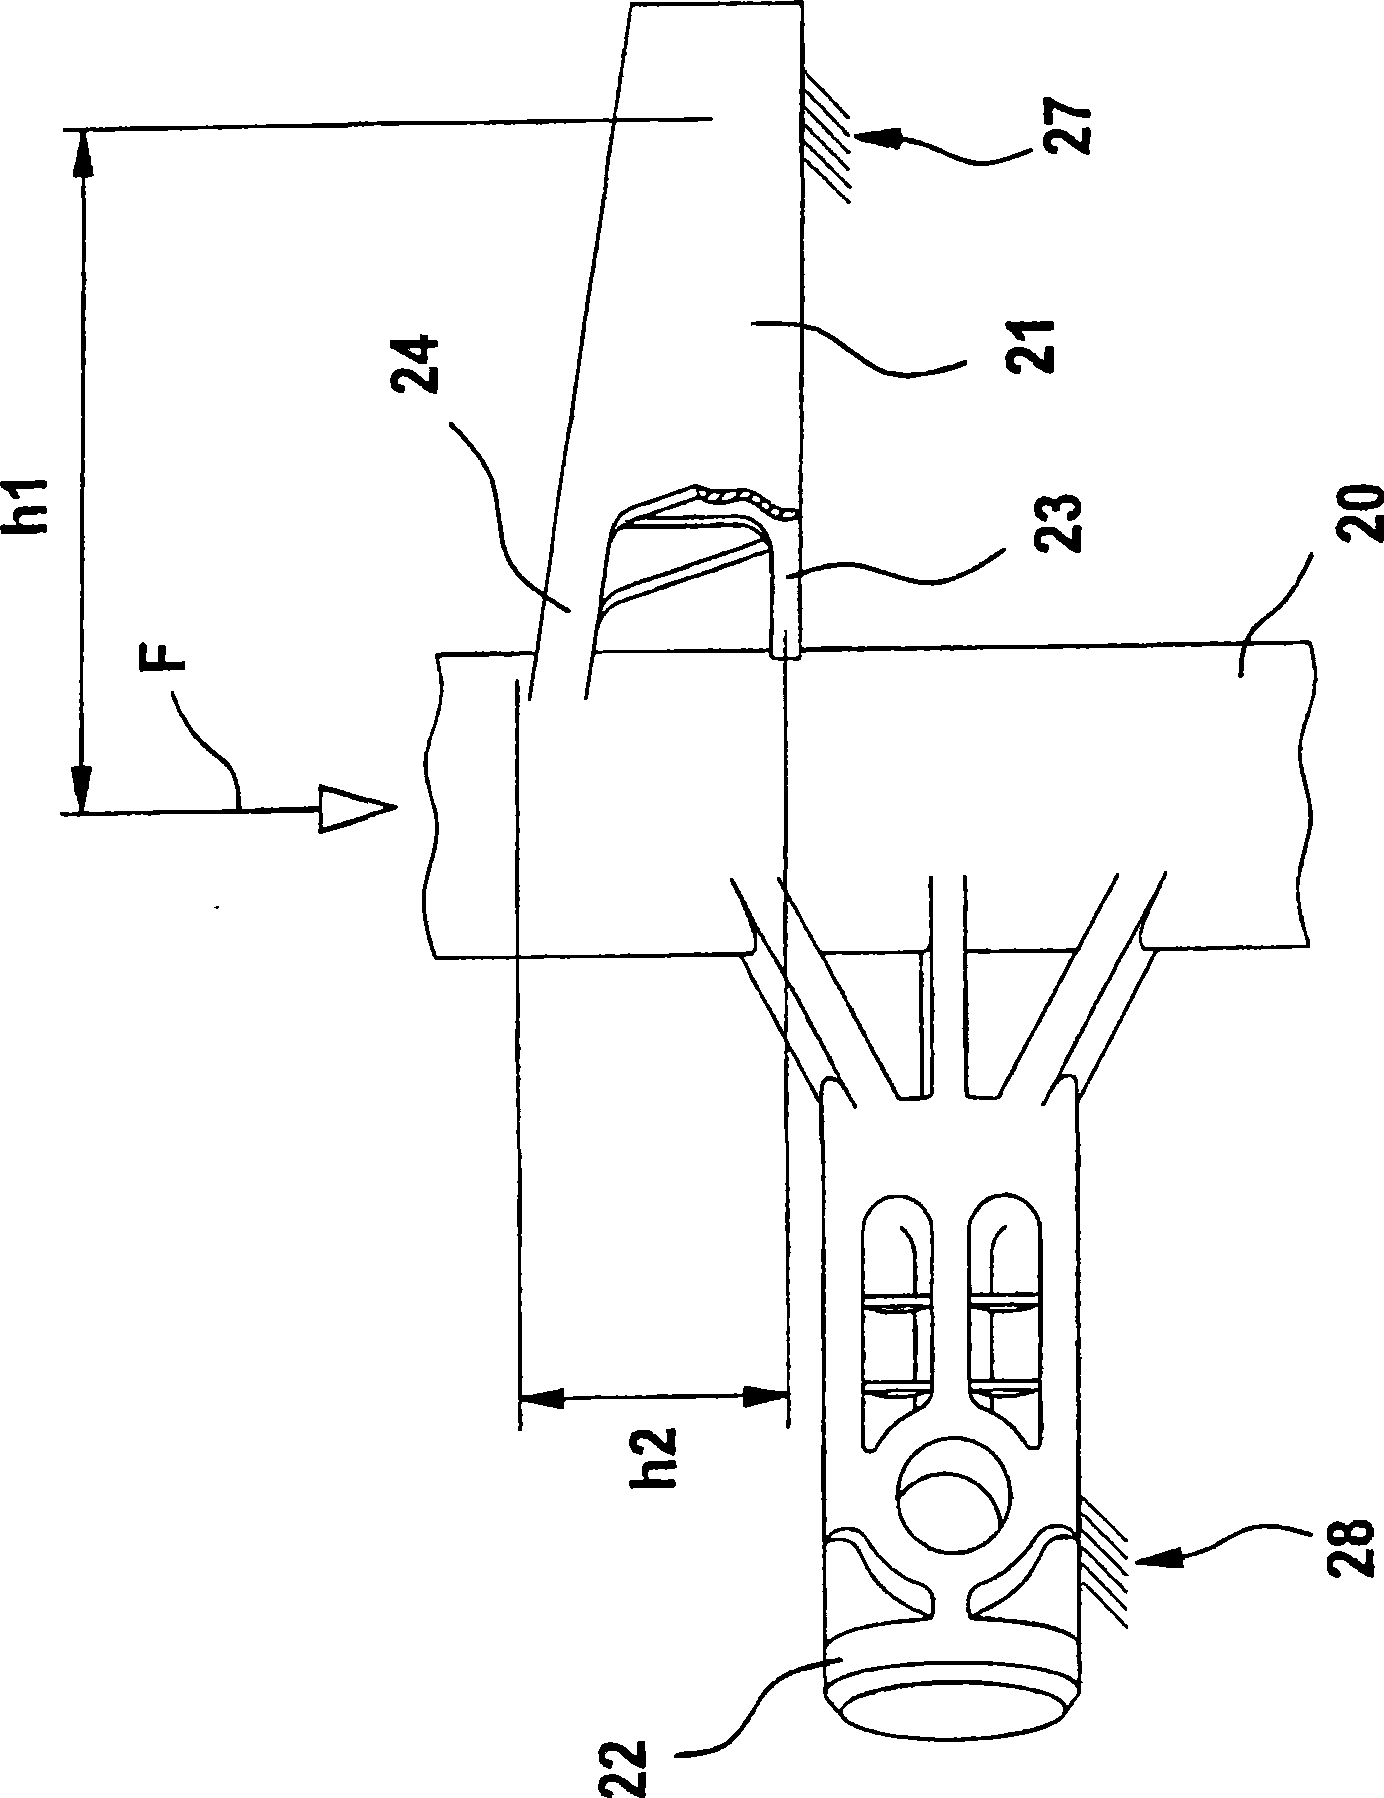 Windshield wiping device for a motor vehicle